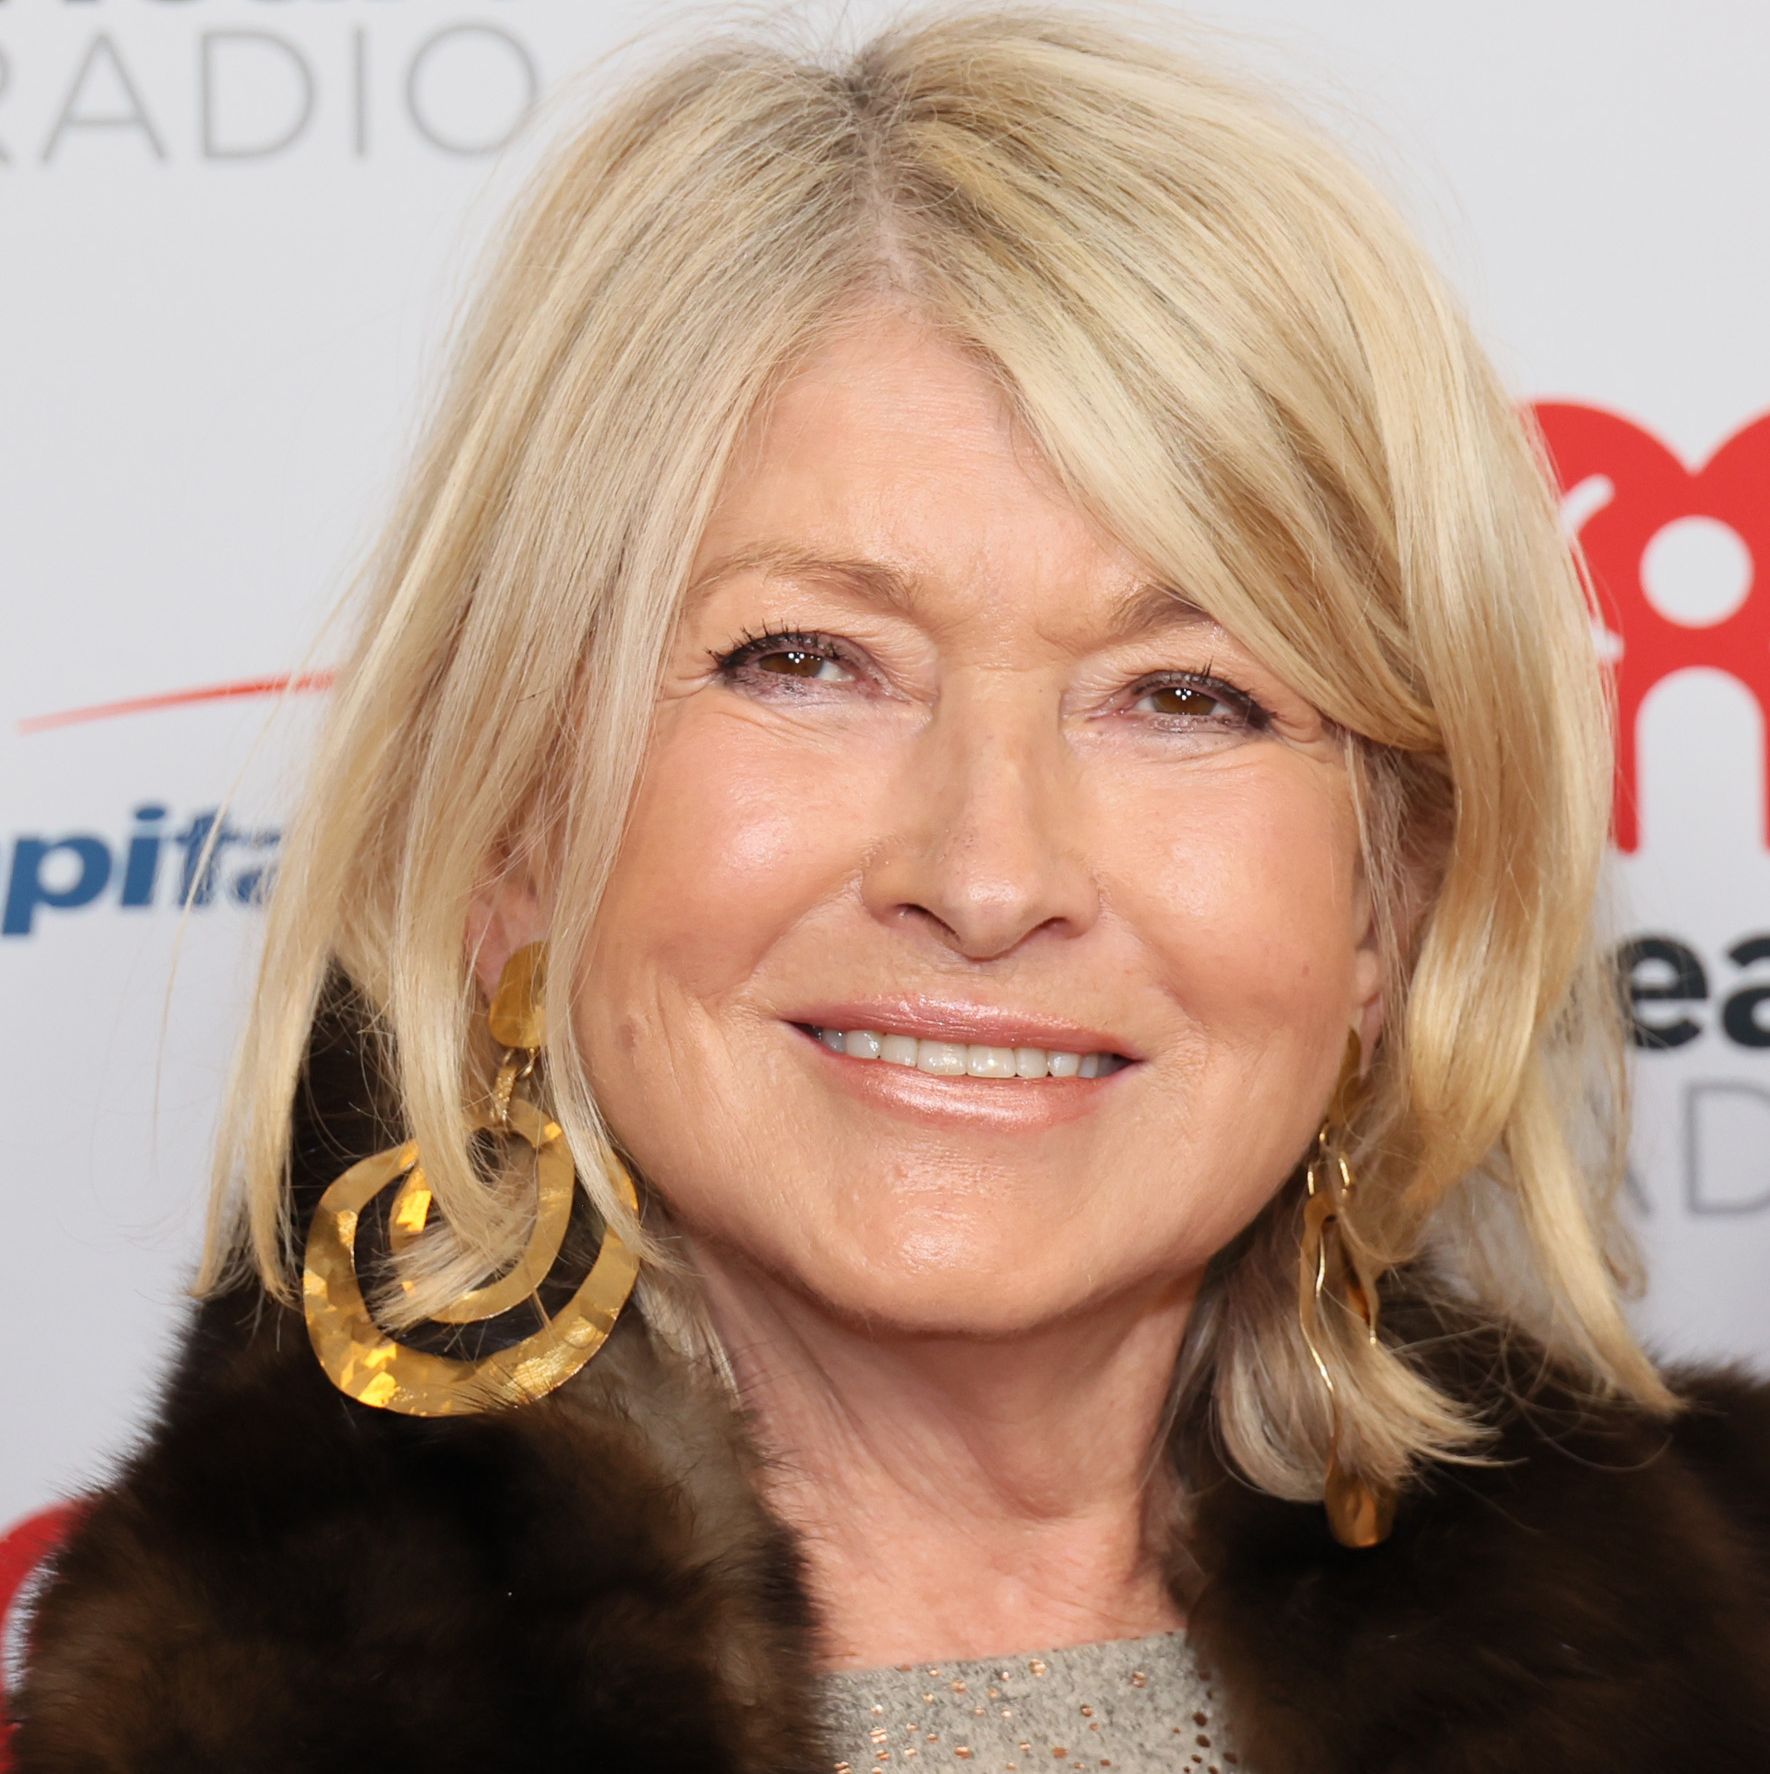 Martha Stewart Shares the Serum She Says Keeps Her Skin Looking 'Really Good' at 81